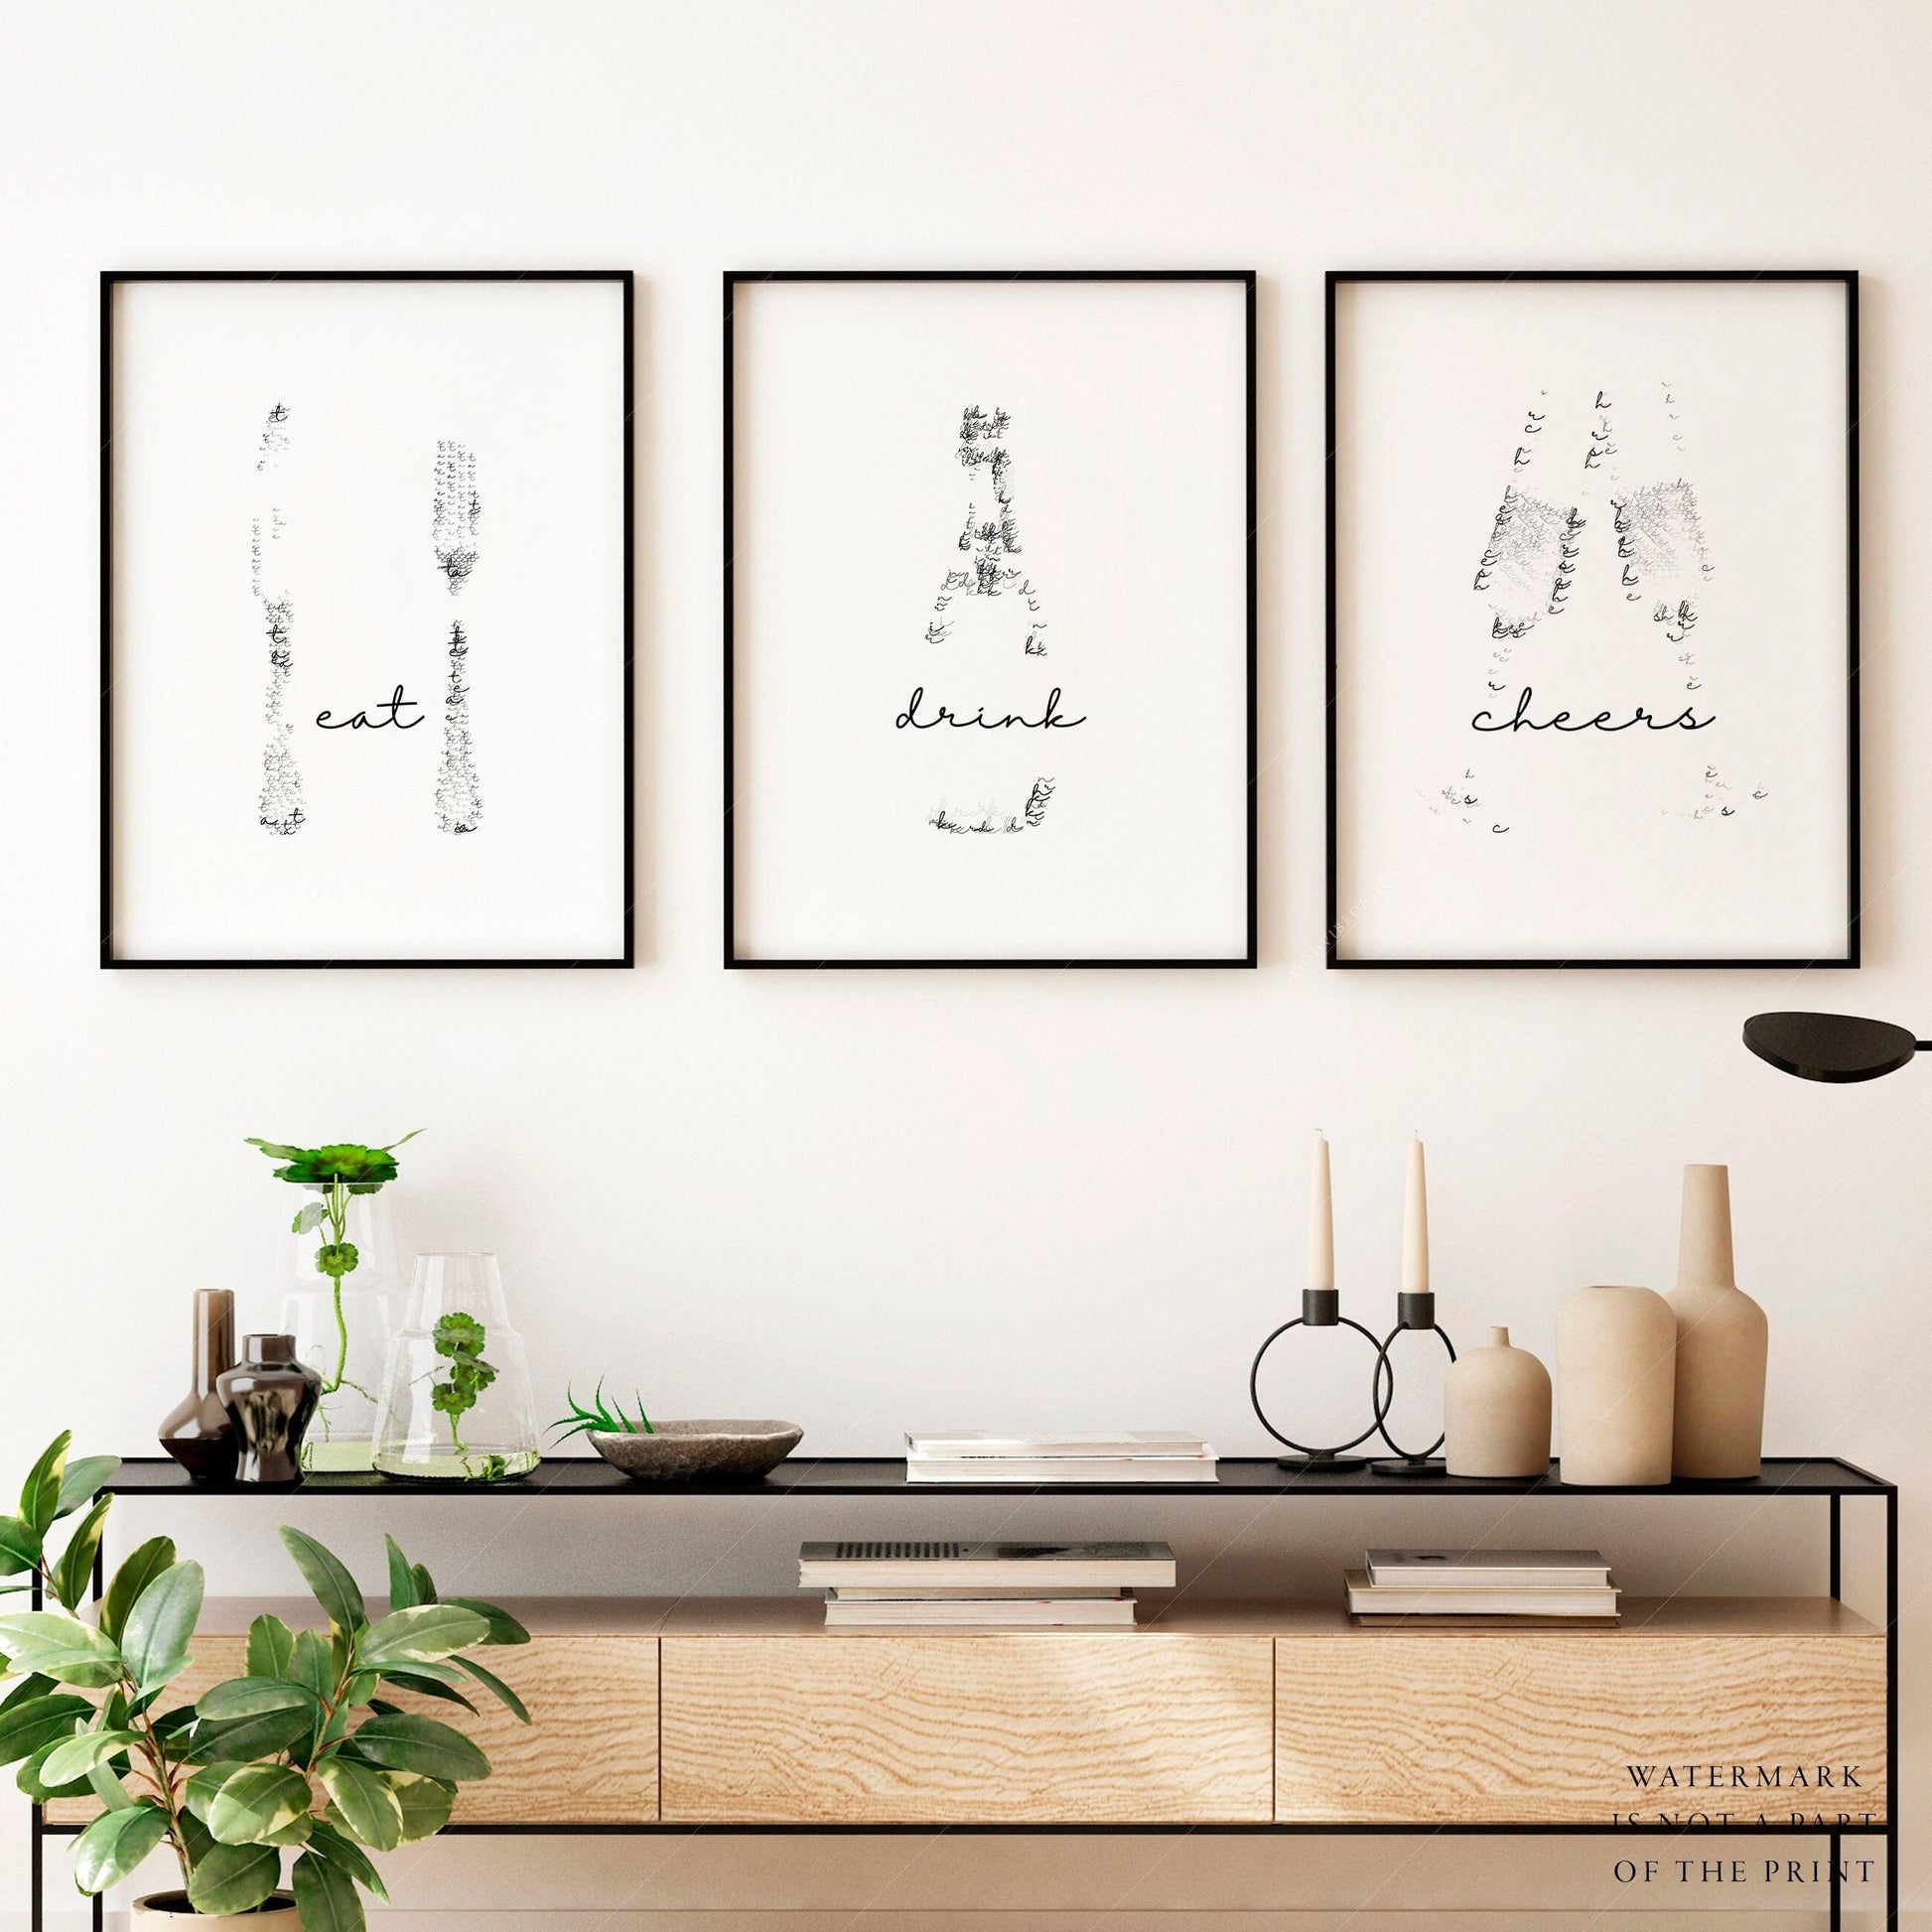 Home Poster Decor Cheers Sign, Cheers Print, Eat Drink Cheers, Set of 3 Prints, Dine Decor, Bar Decor, Minimalist Kitchen, Wedding Party Decor, Drink Wall Art